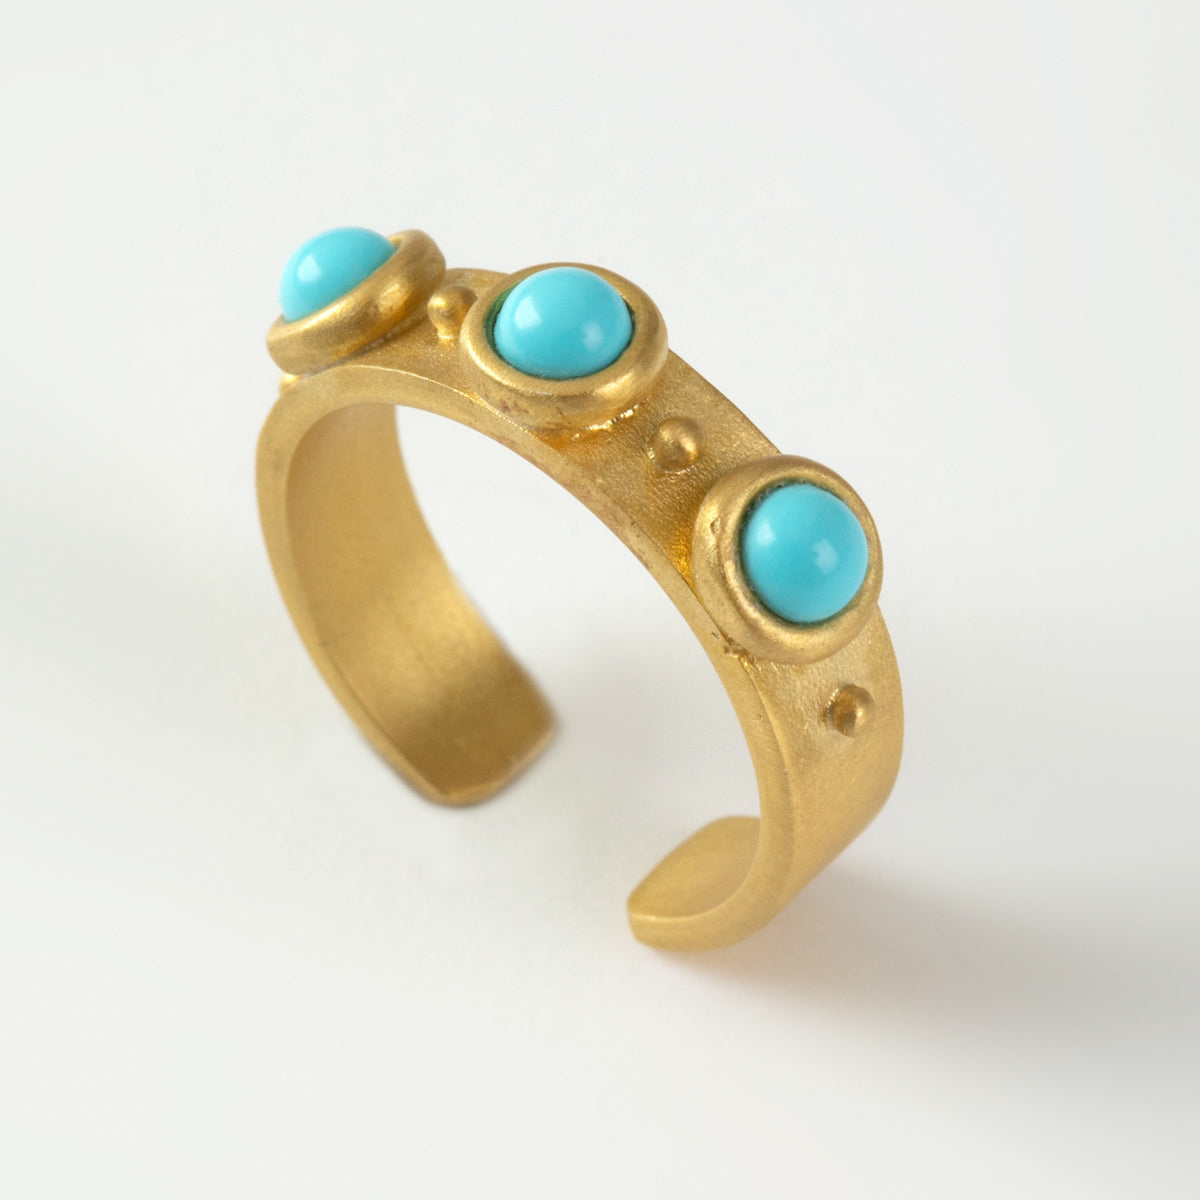 Dorothea Turquoise ring, silver 925° gold plated 22k by Pearl Martini